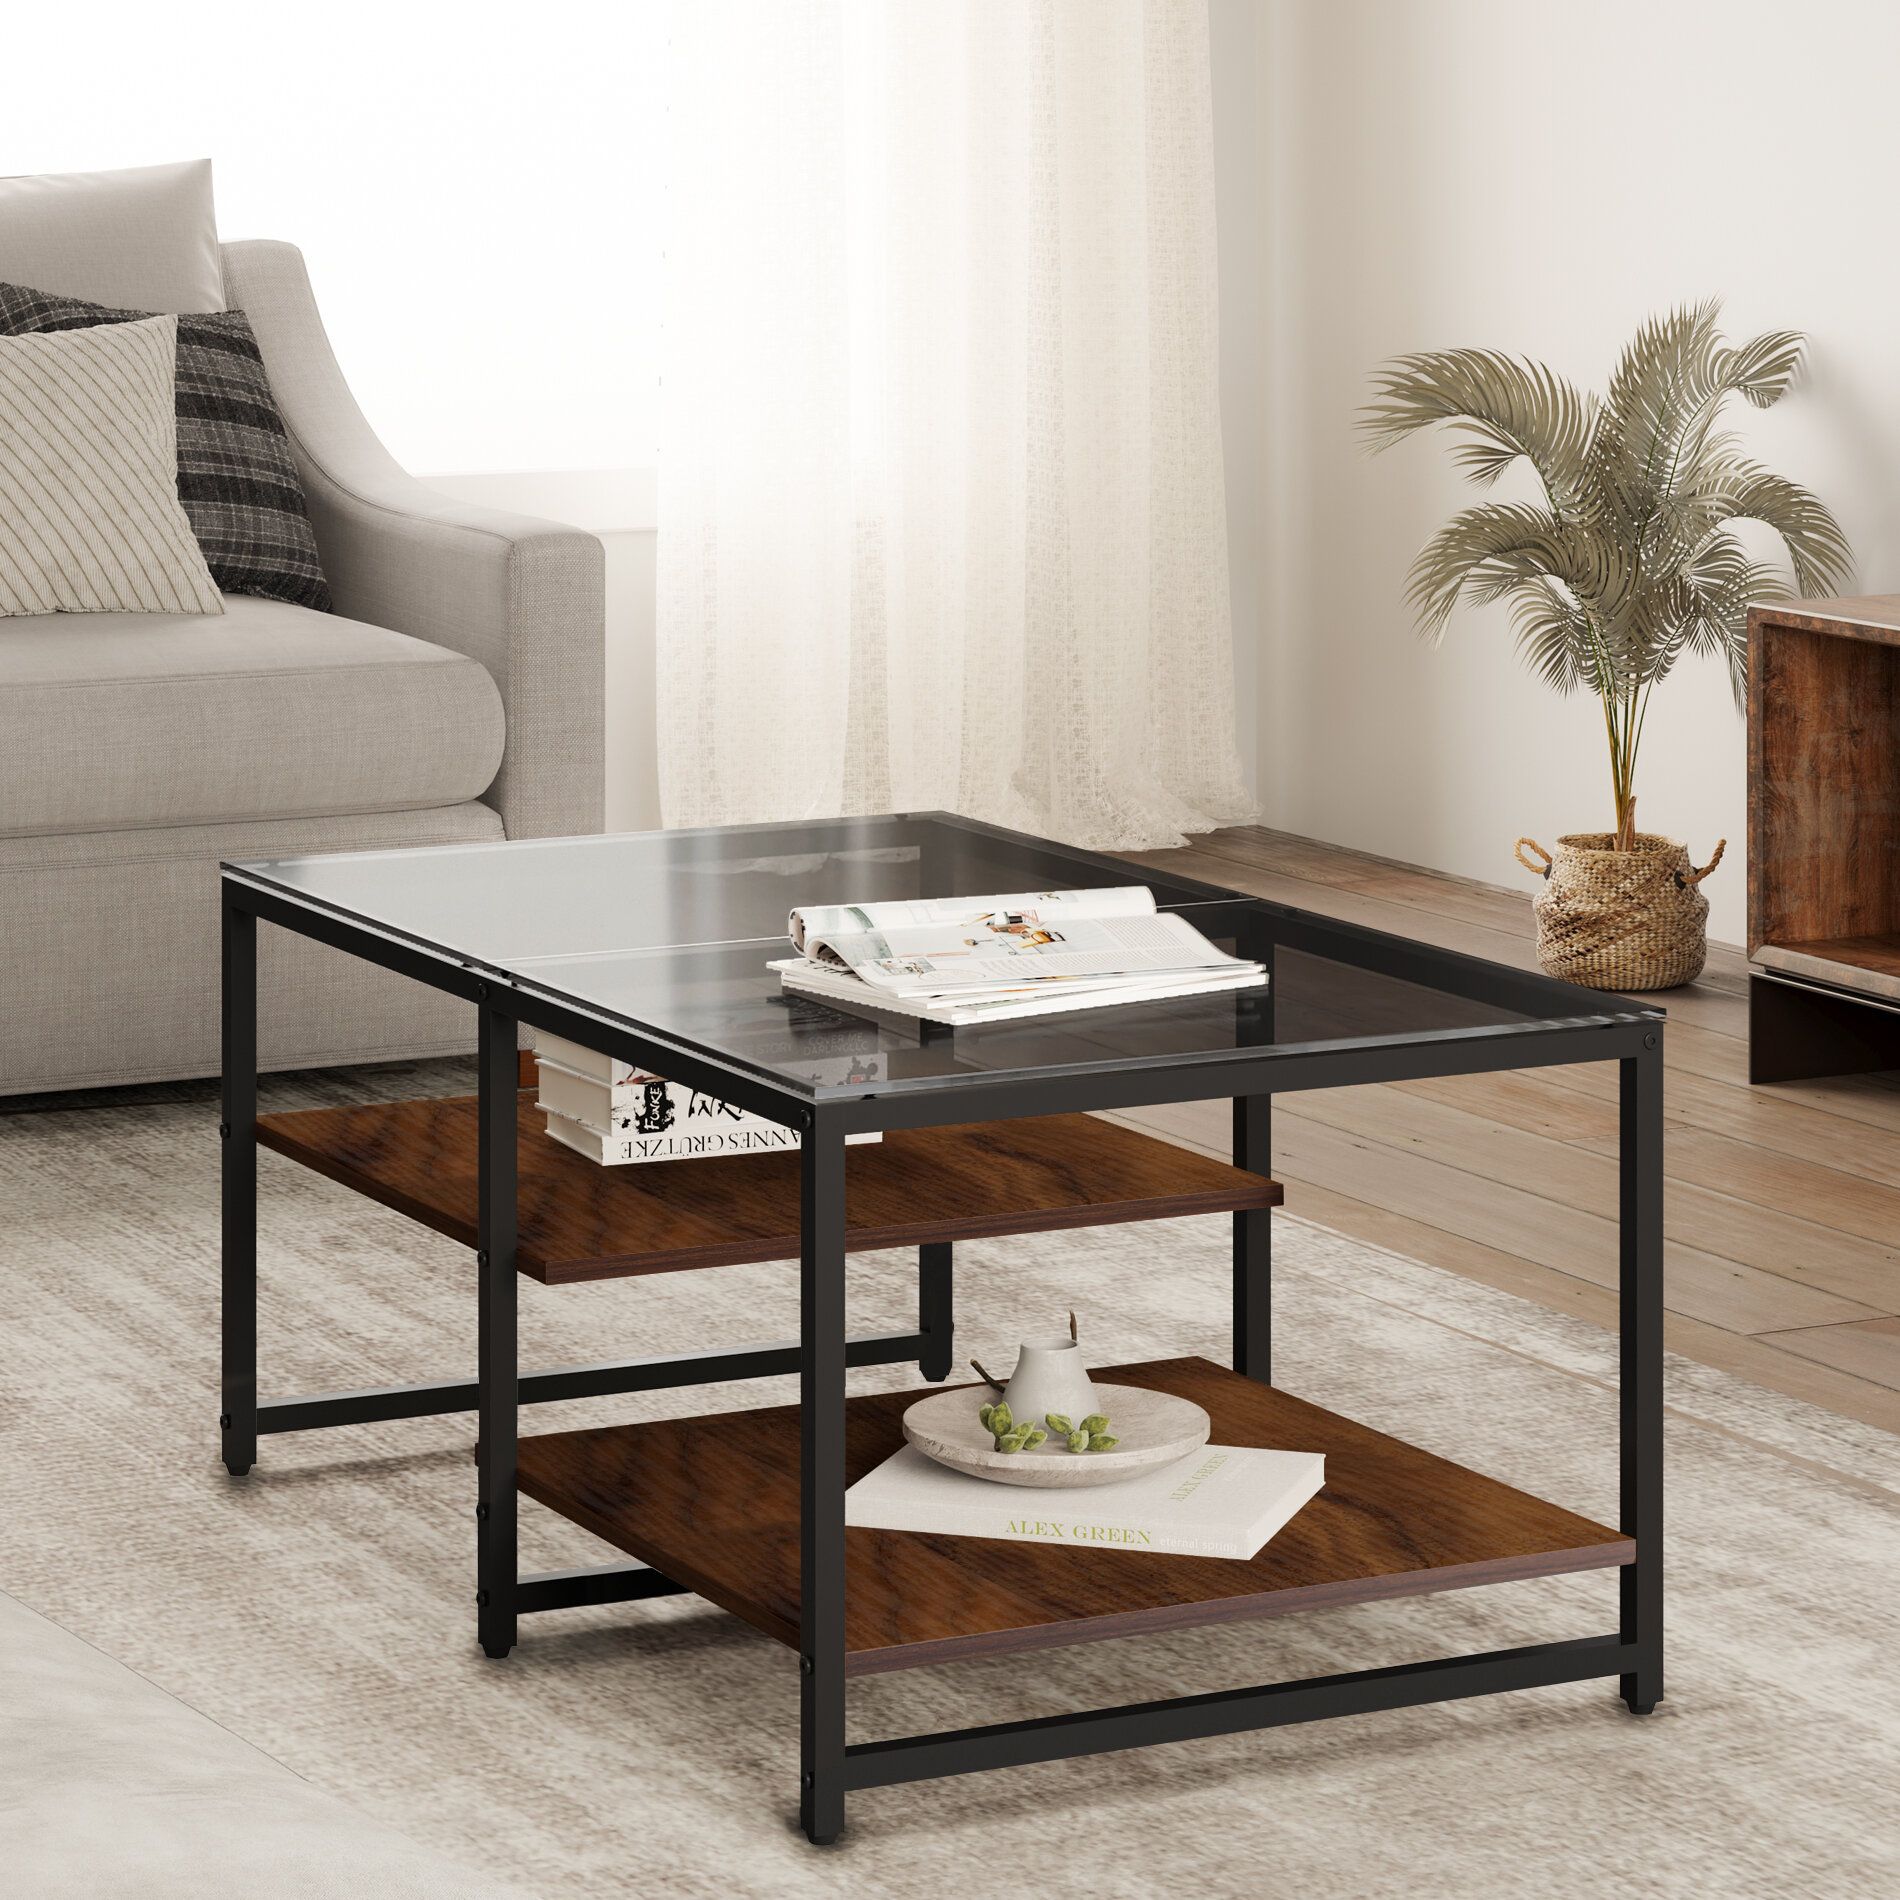 17 Stories Keian Morden Glass Coffee Table With Storage Shelf Shelves, 39.3  X 23.6 X  (View 1 of 20)